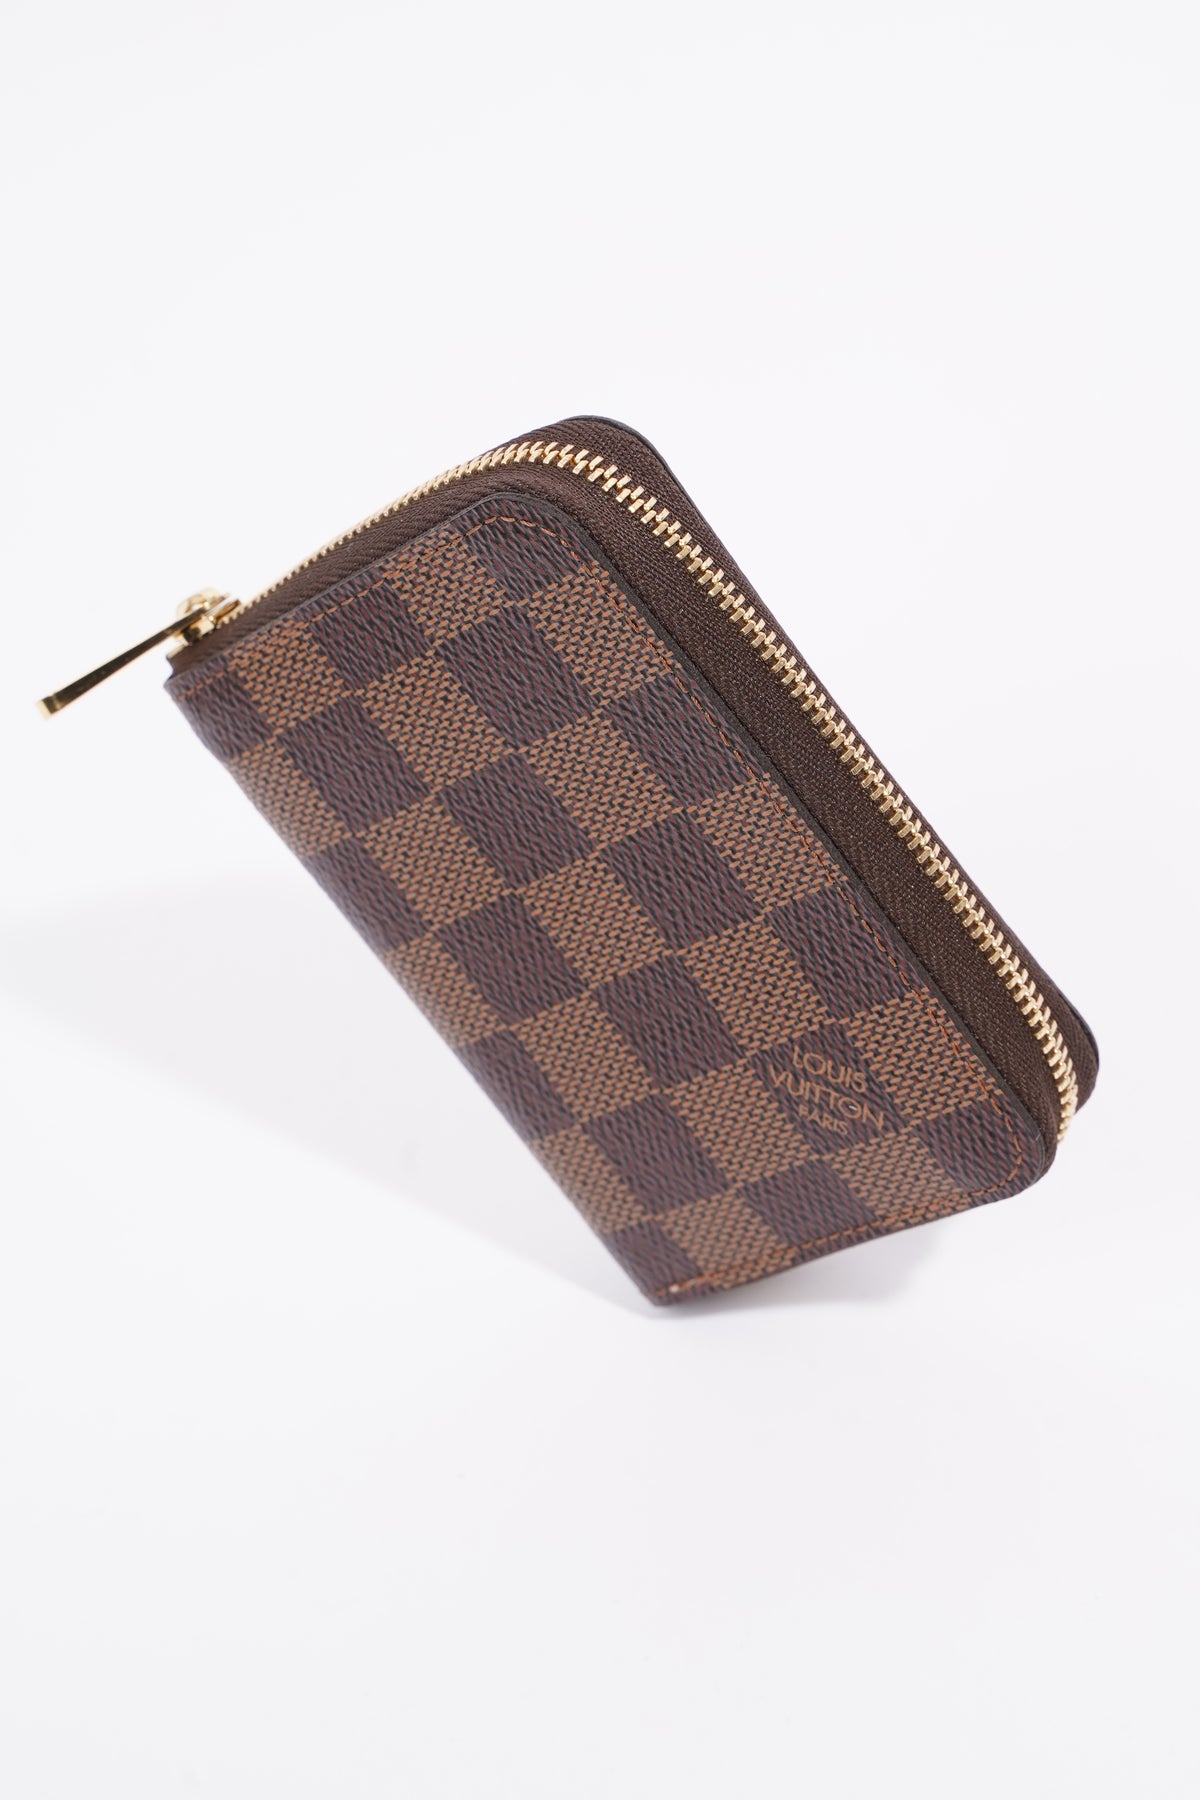 Zippy Coin Purse Damier Ebene Canvas - Wallets and Small Leather